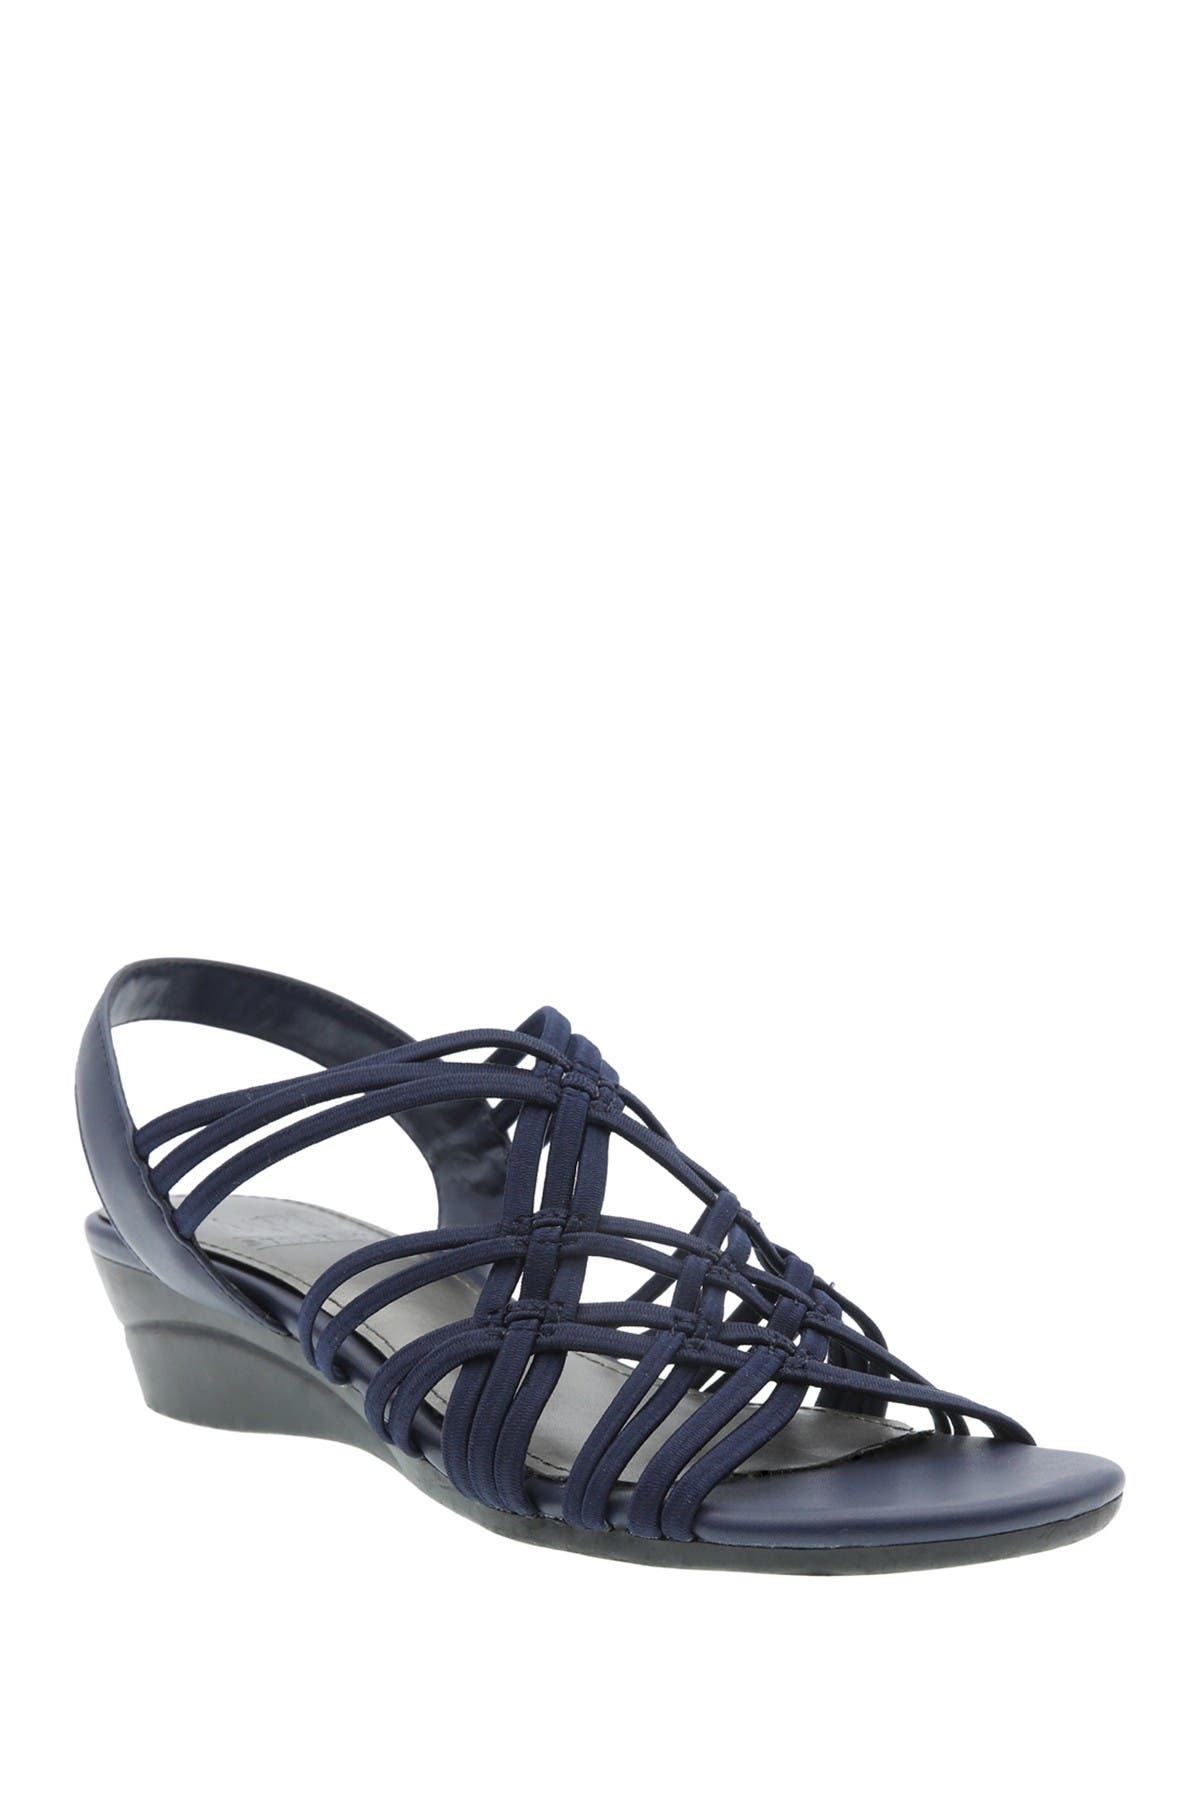 Impo Rainelle Stretch Wedge Sandal In Navy Wide